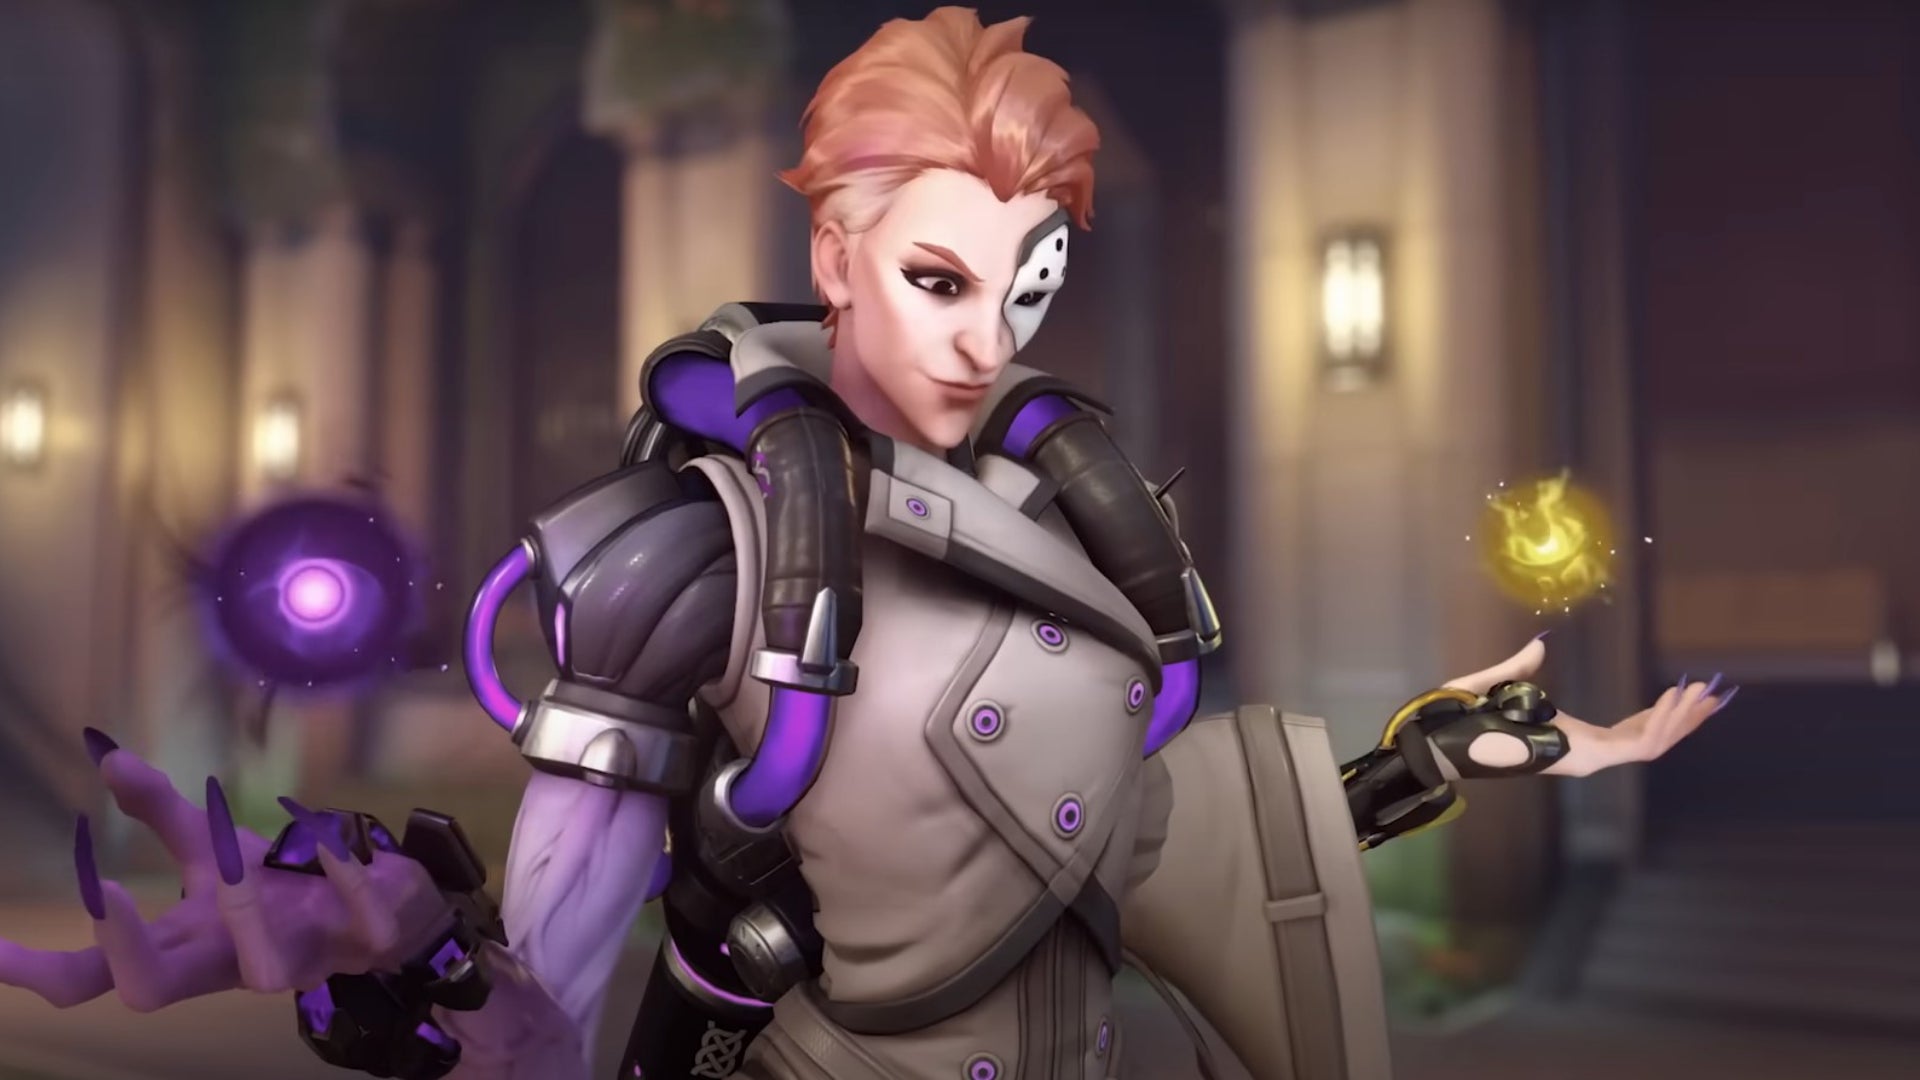 Moira in the Overwatch 2 launch trailer